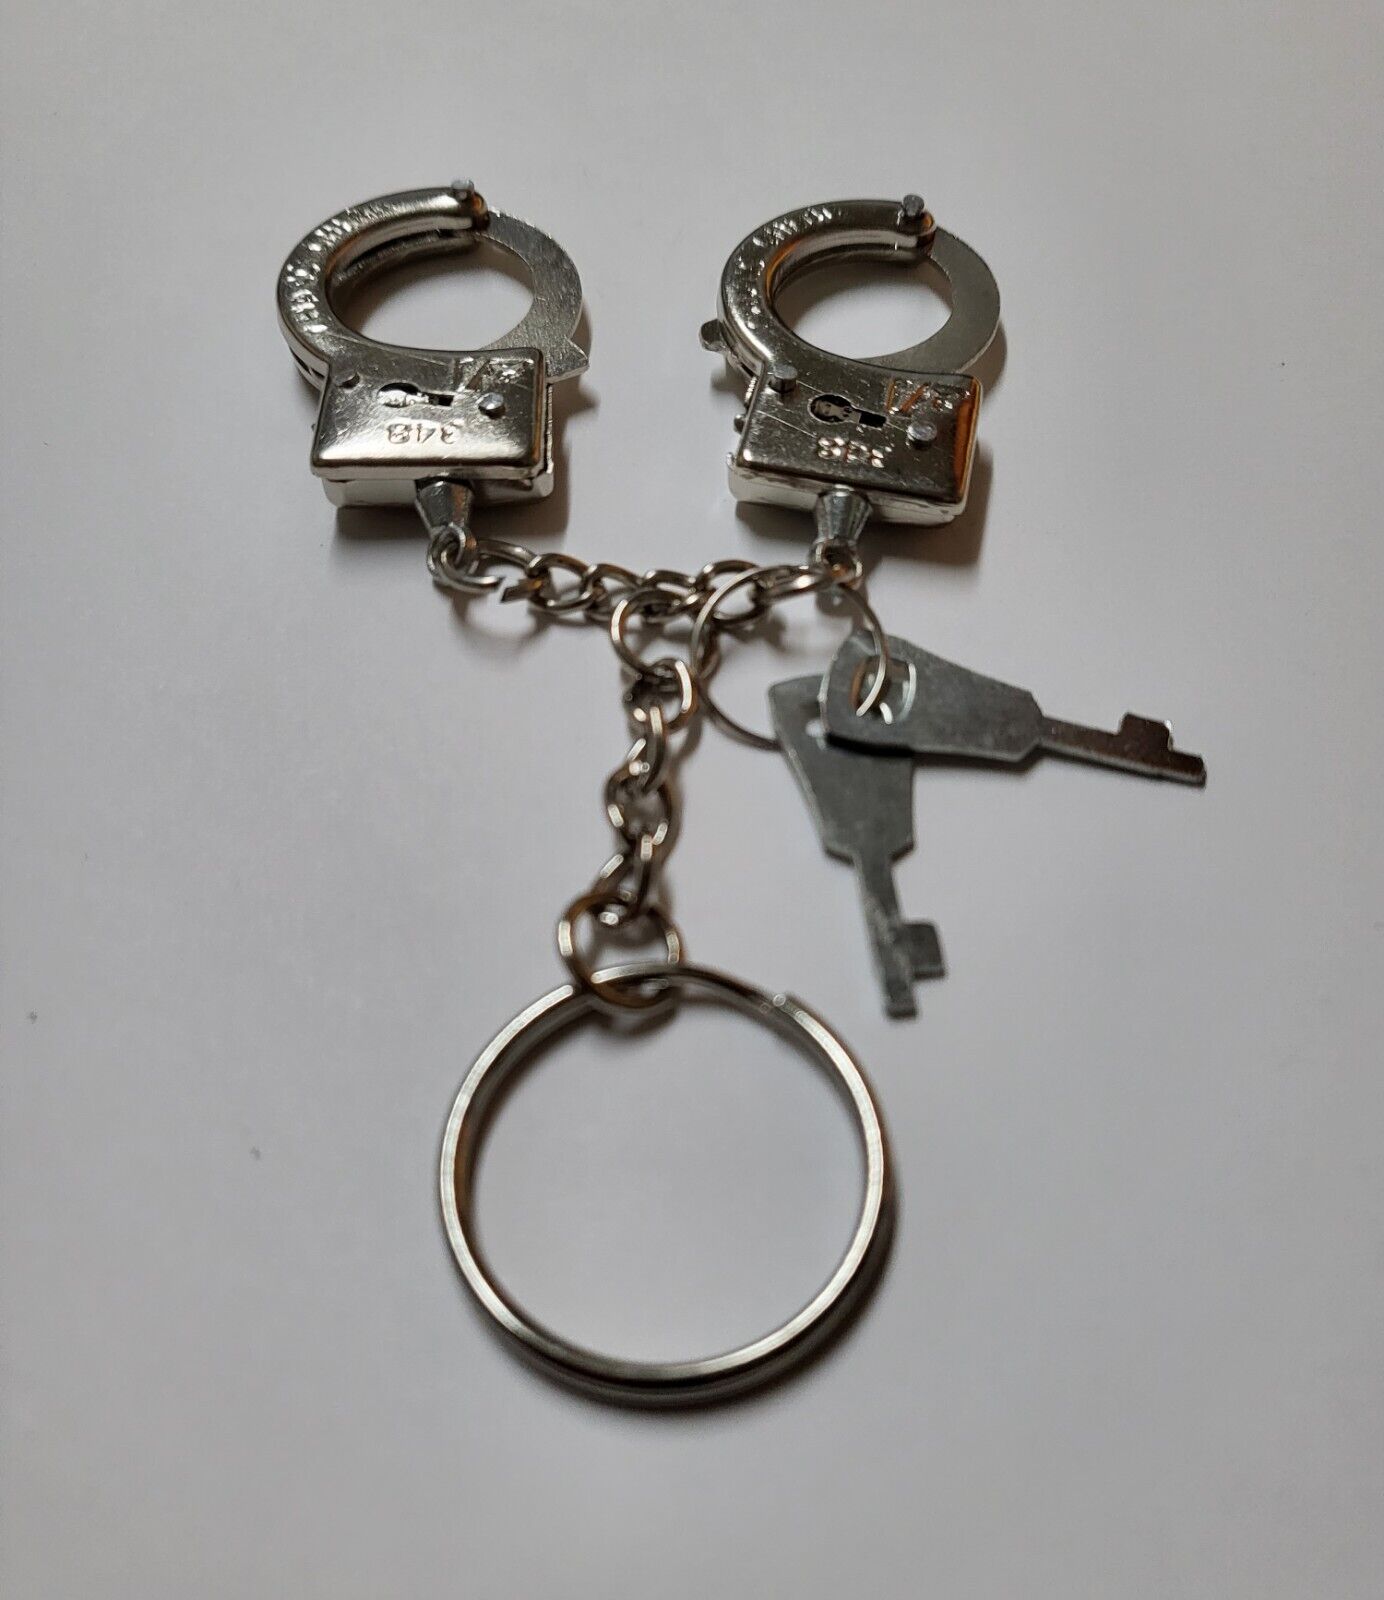 New in Package~(1) Set of Miniature Working Handcuffs Key Ring with Keys